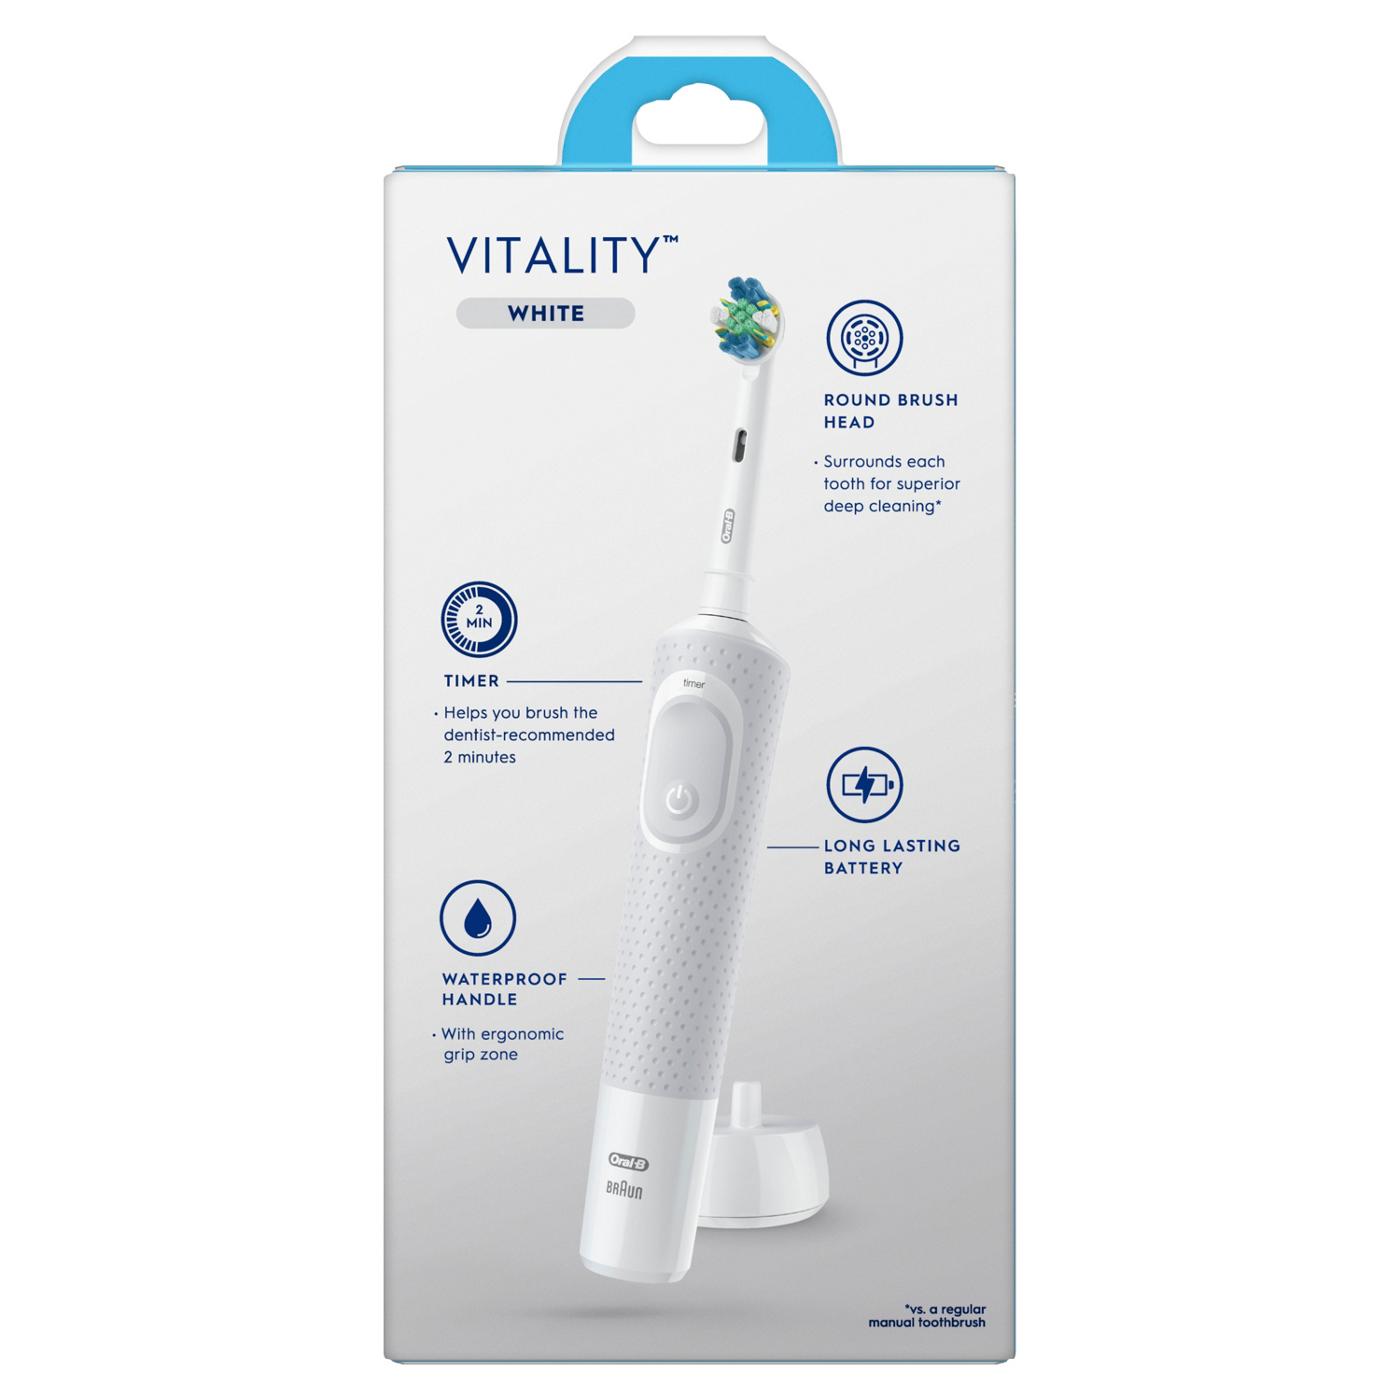 Oral-B Vitality Rechargeable Toothbrush; image 4 of 7